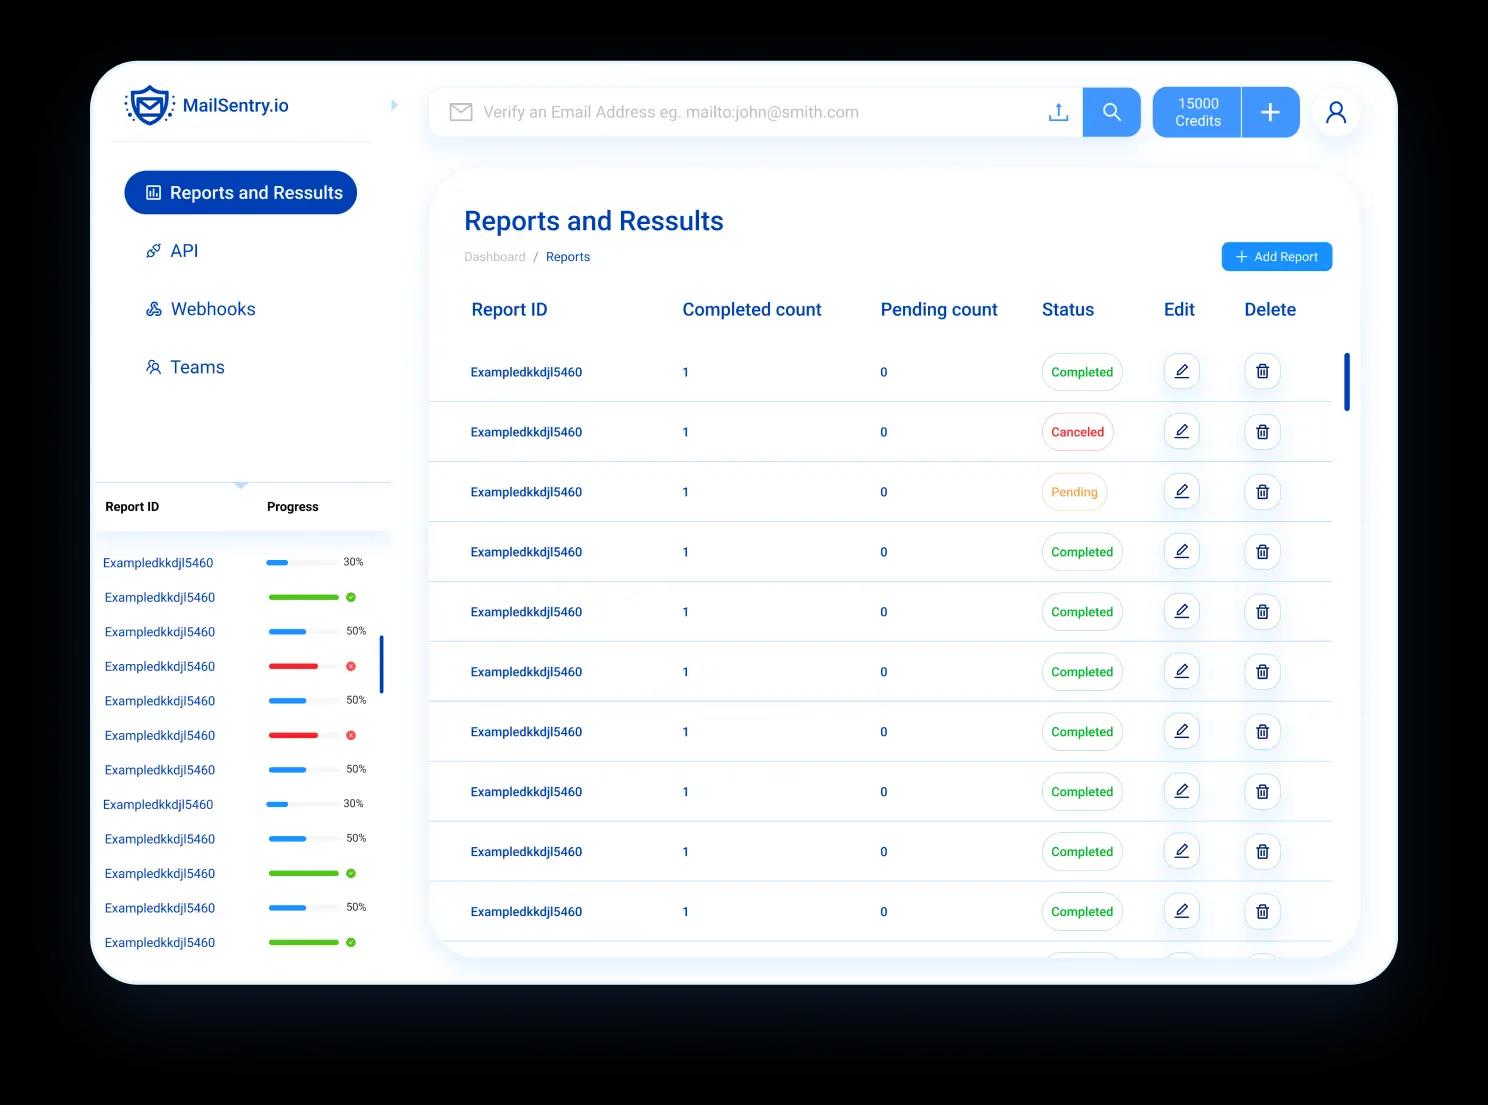 Interactive MailSentry dashboard showcasing email verification results